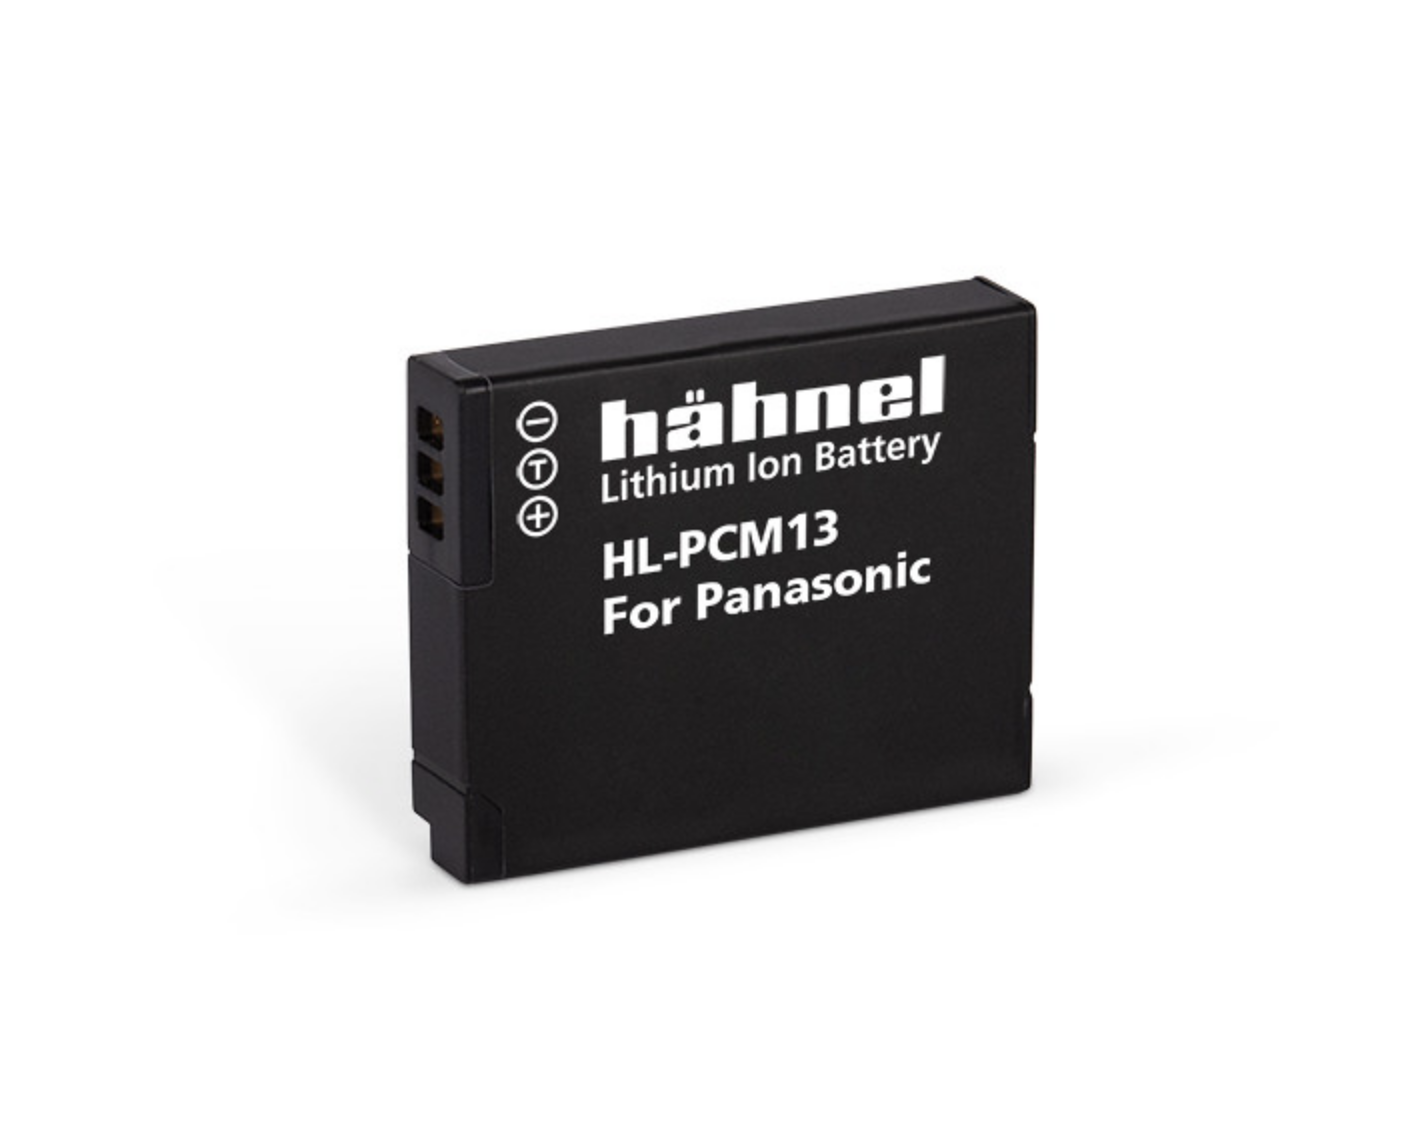 Hahnel HL-PCM13 Li-ion Replacement Battery for Panasonic DMW-BCM13